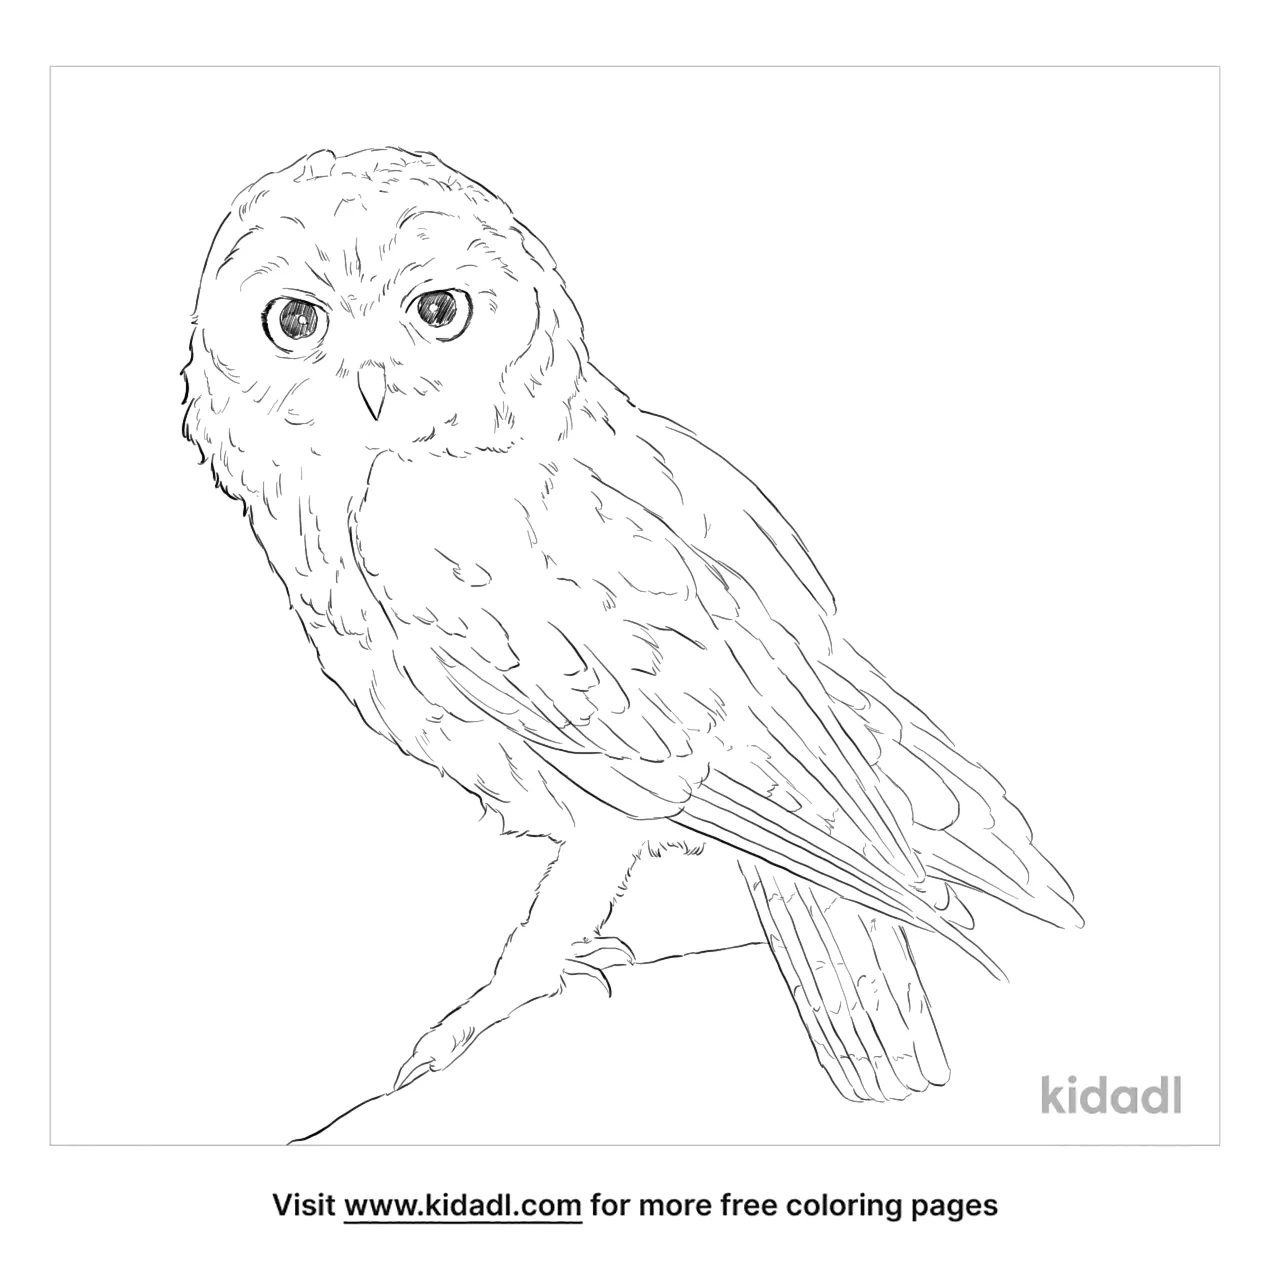 Omani Owl Coloring Page